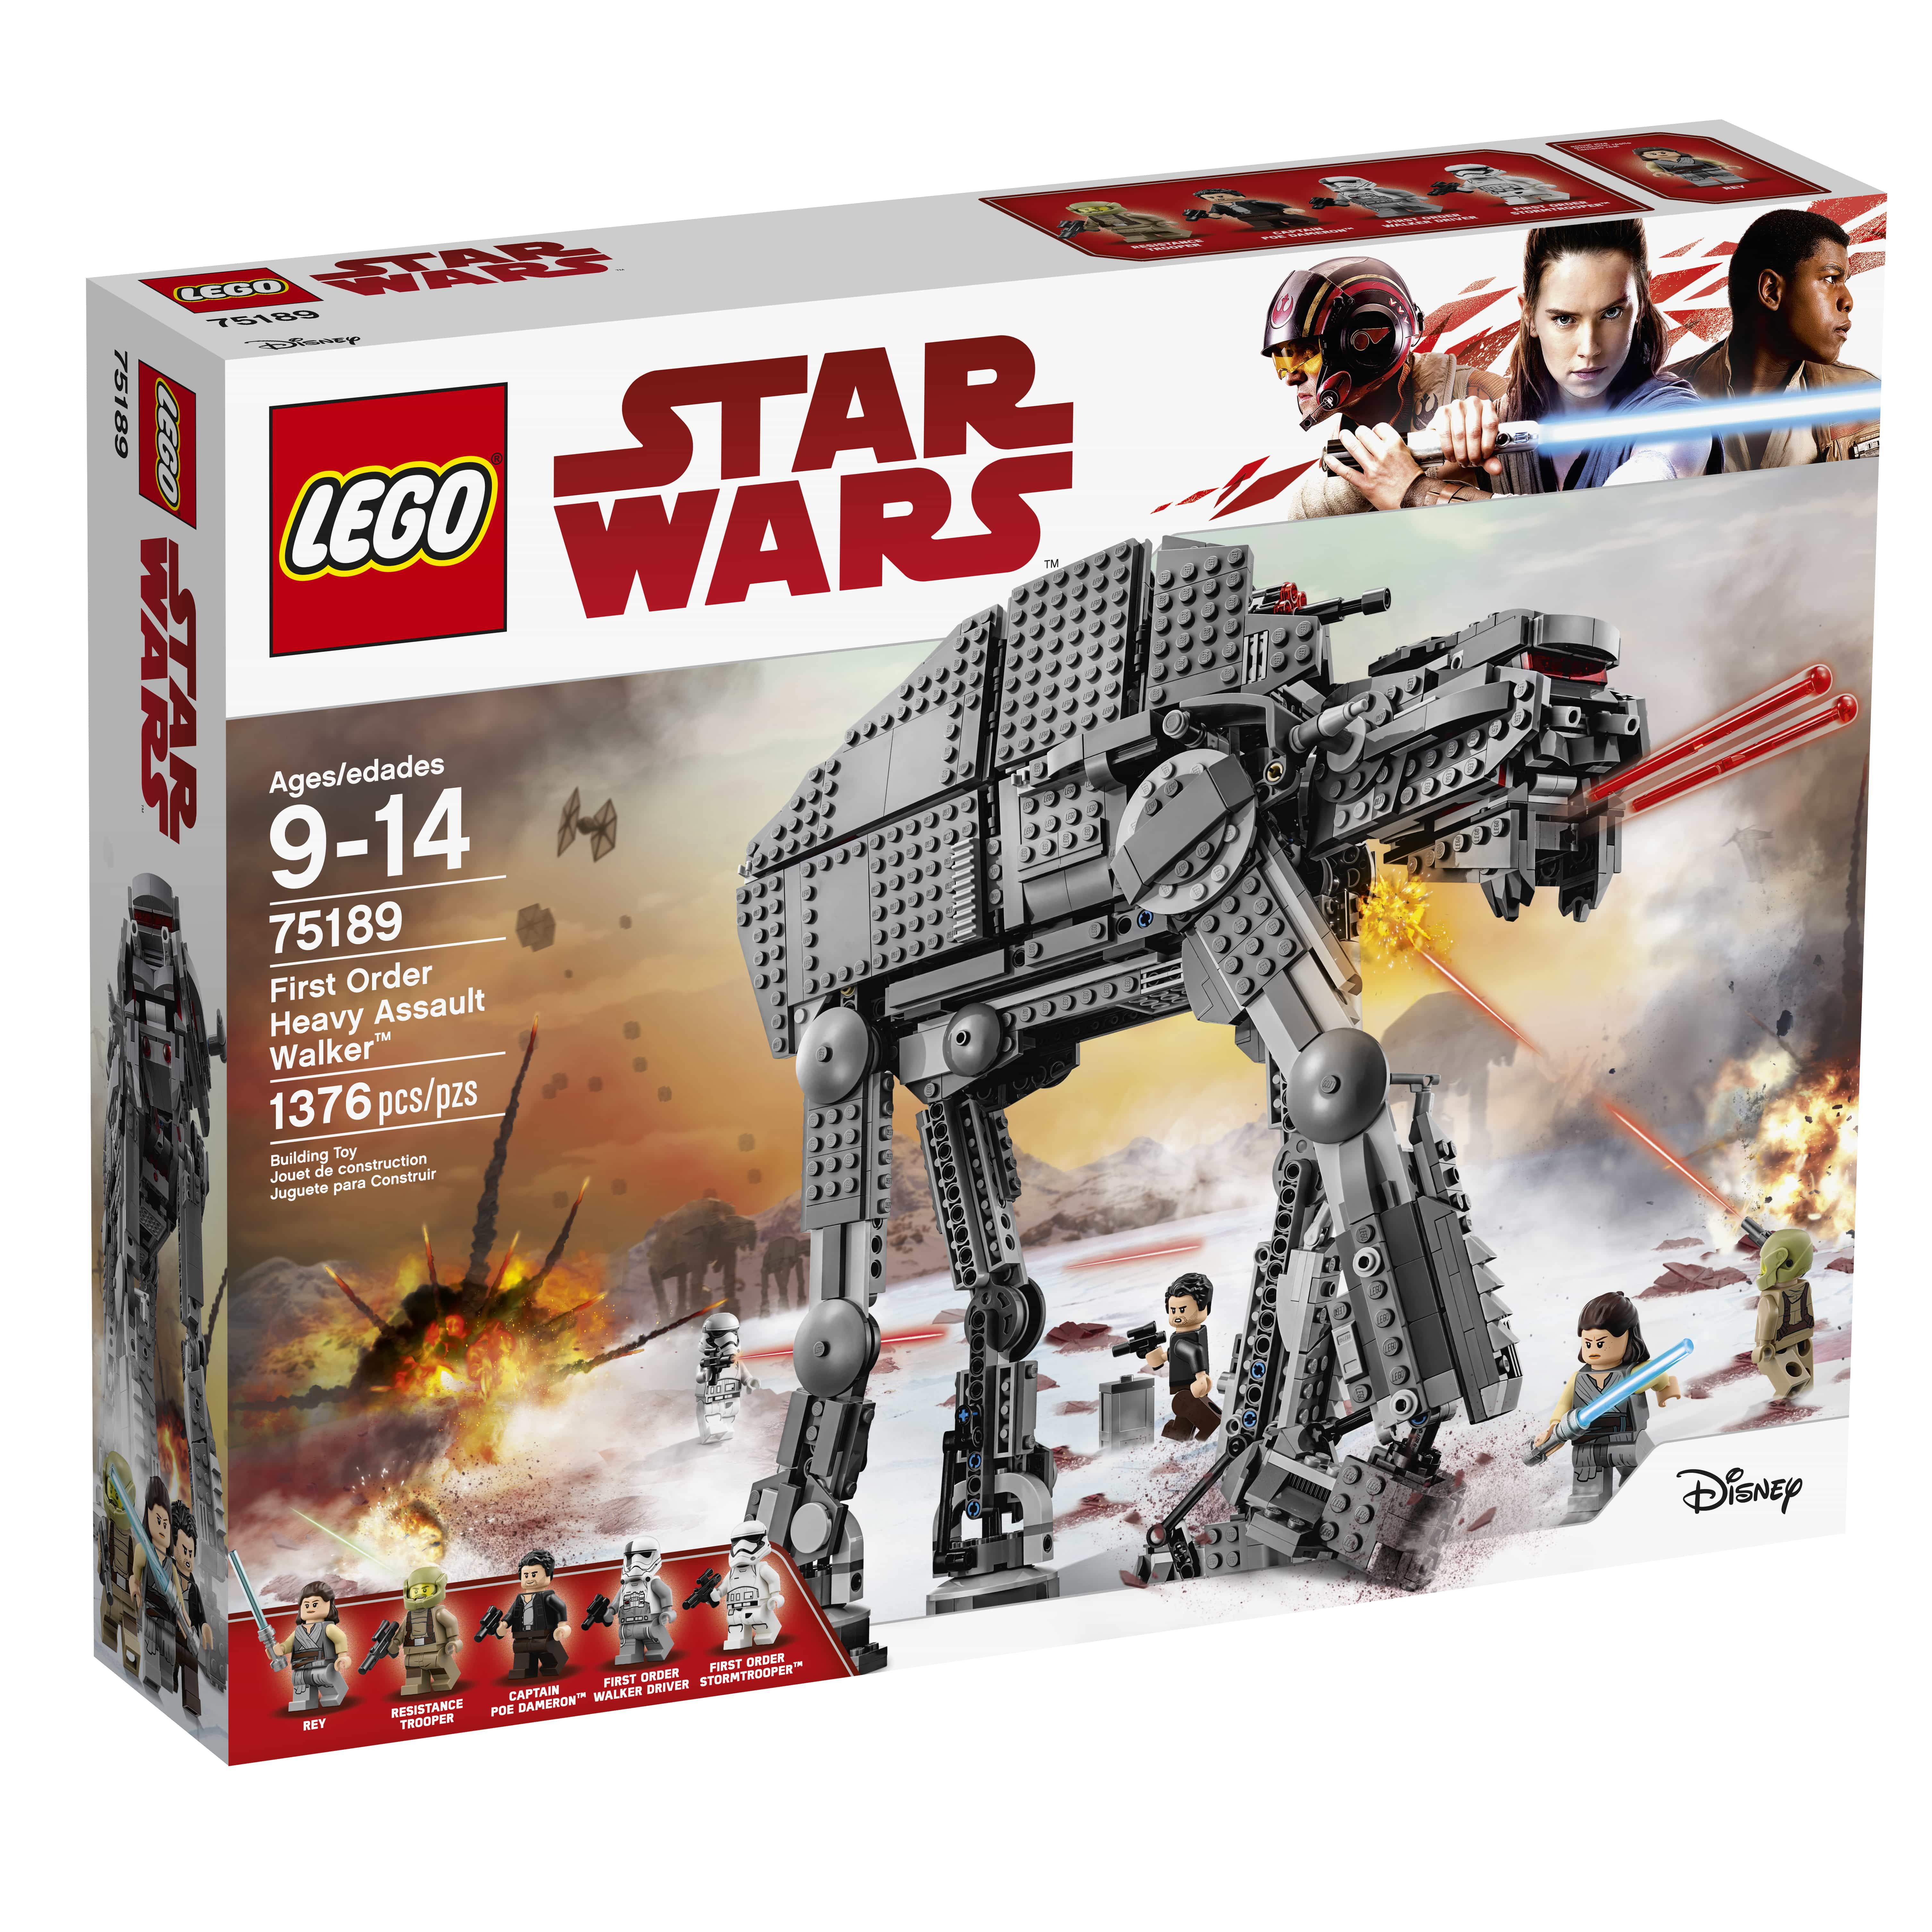 LEGO Star Wars The Last Jedi Sets Released